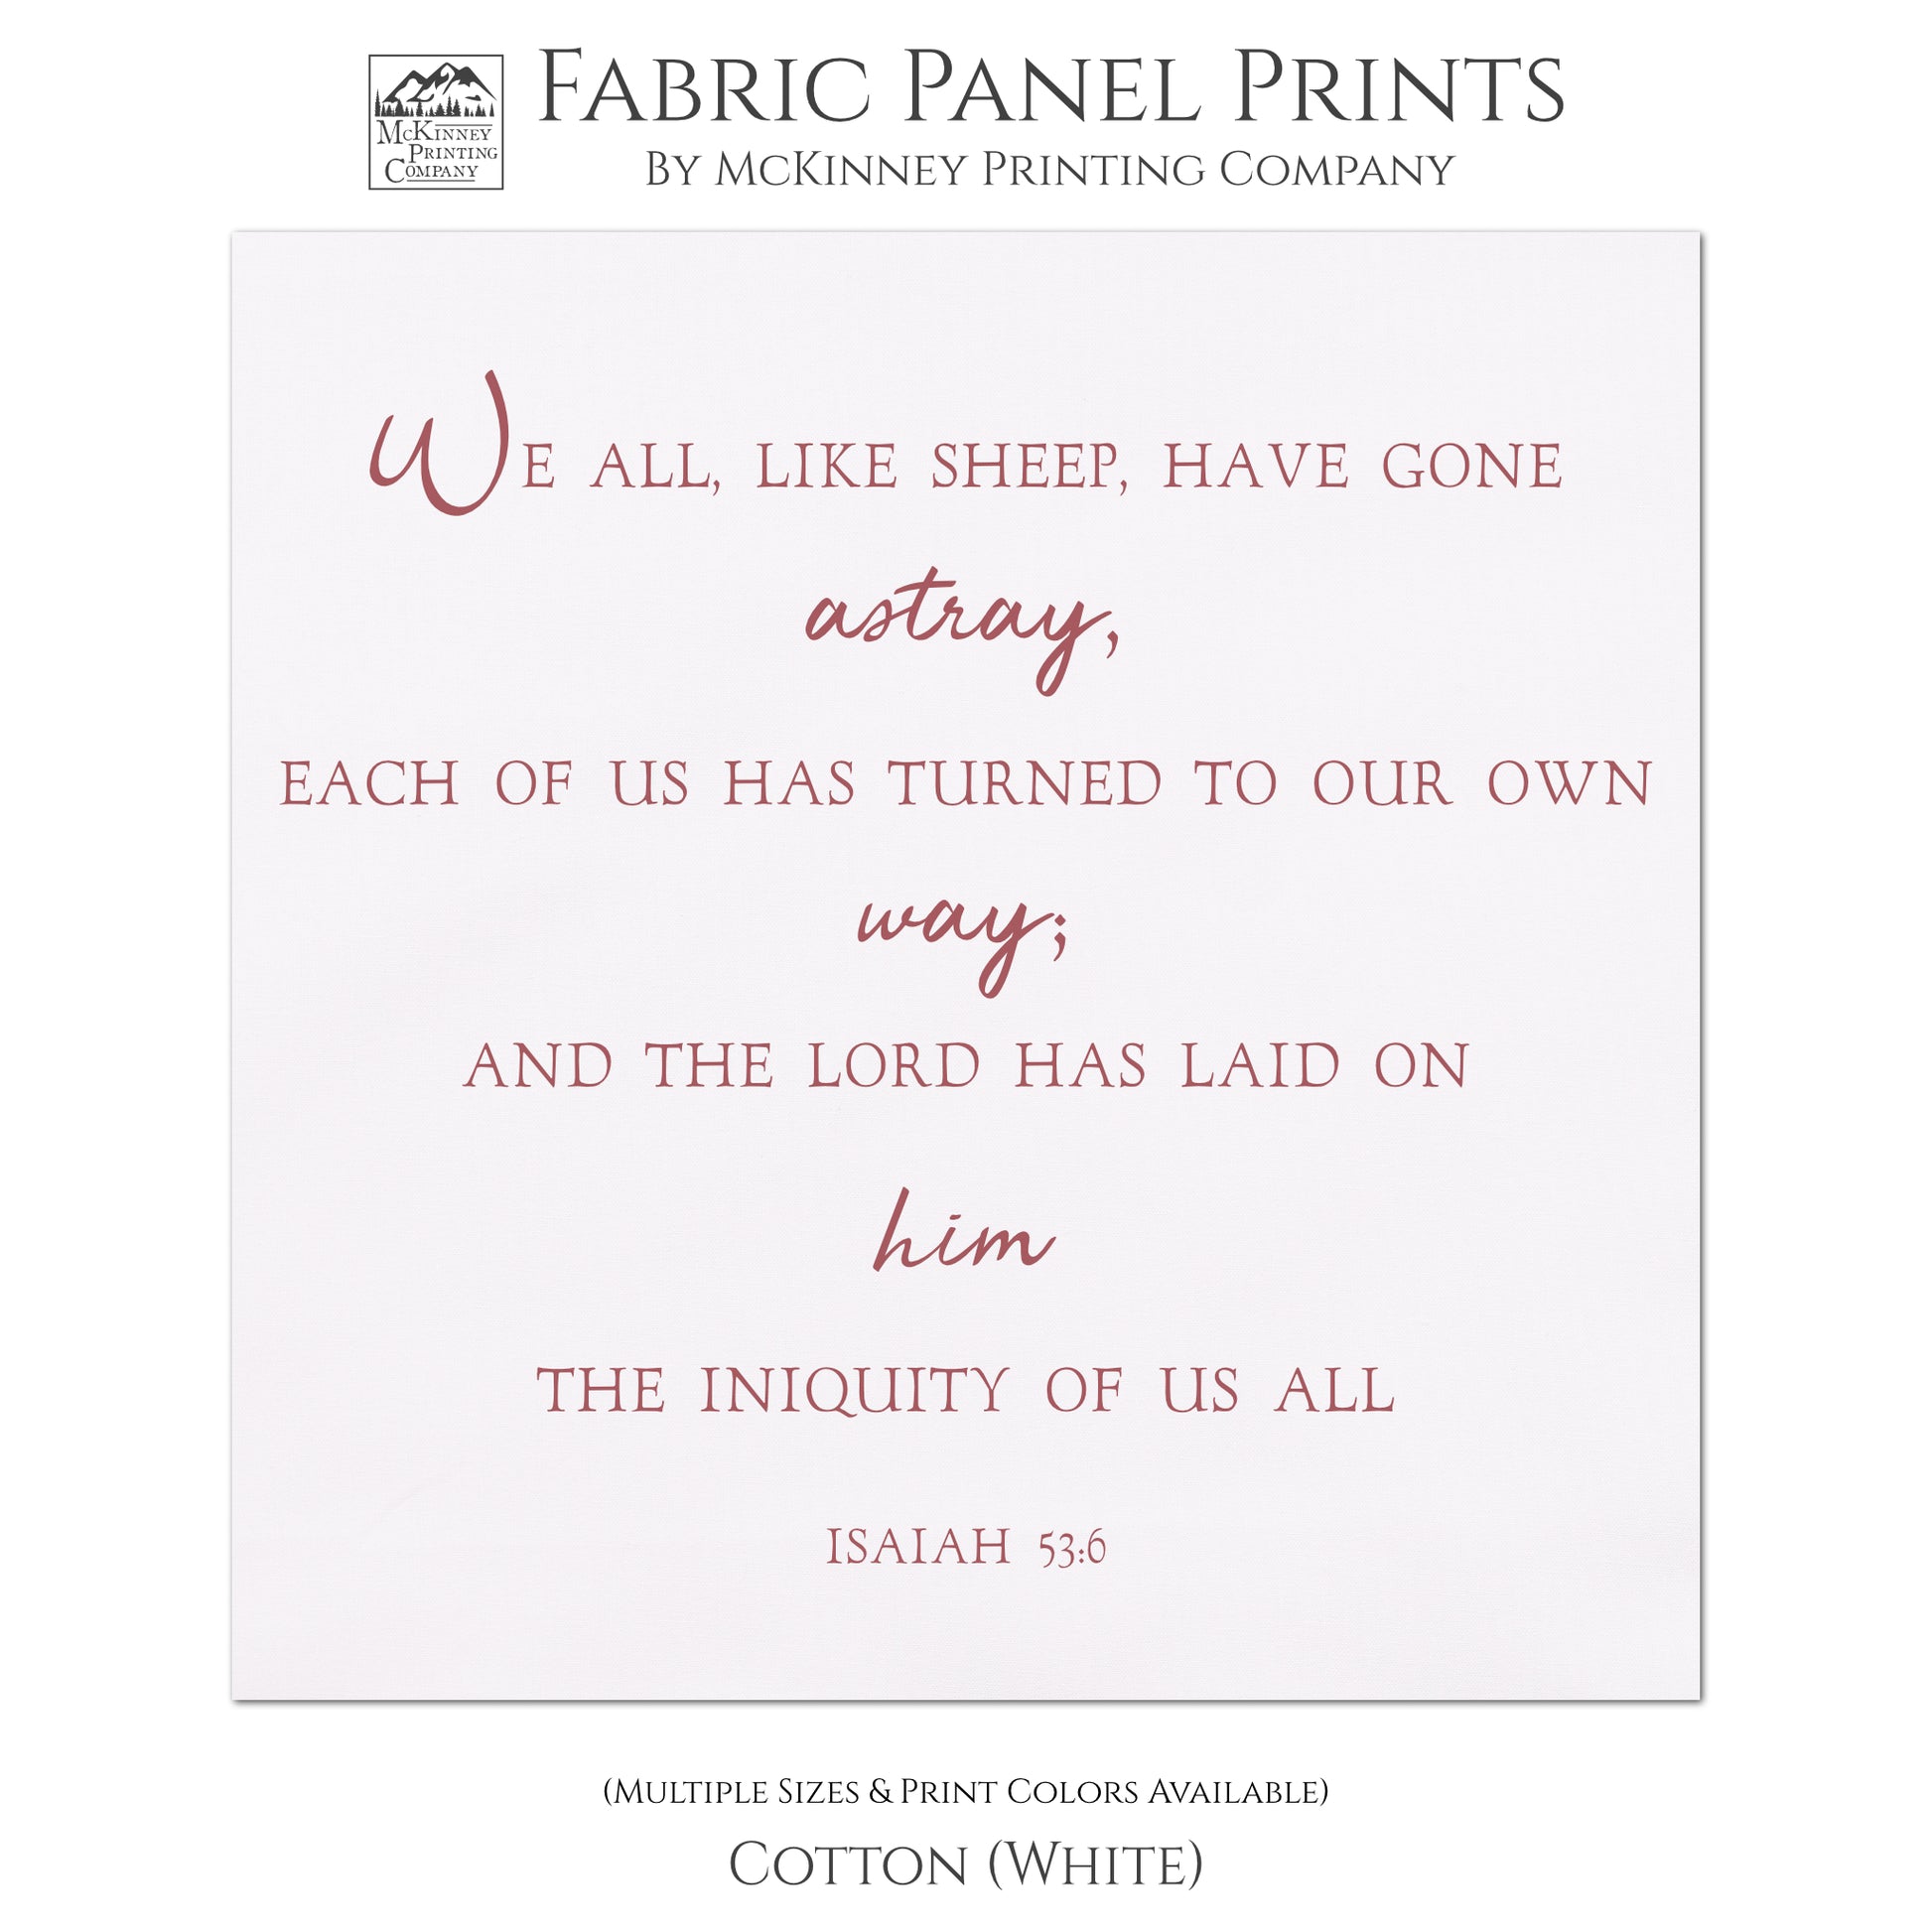 We all, like sheep, have gone astray, each of us has turned to our own way; and the Lord has laid on him the iniquity of us all - Isaiah 53 6. Small Print Quilt Fabric, Wall Art, Quilting Block - Cotton, White